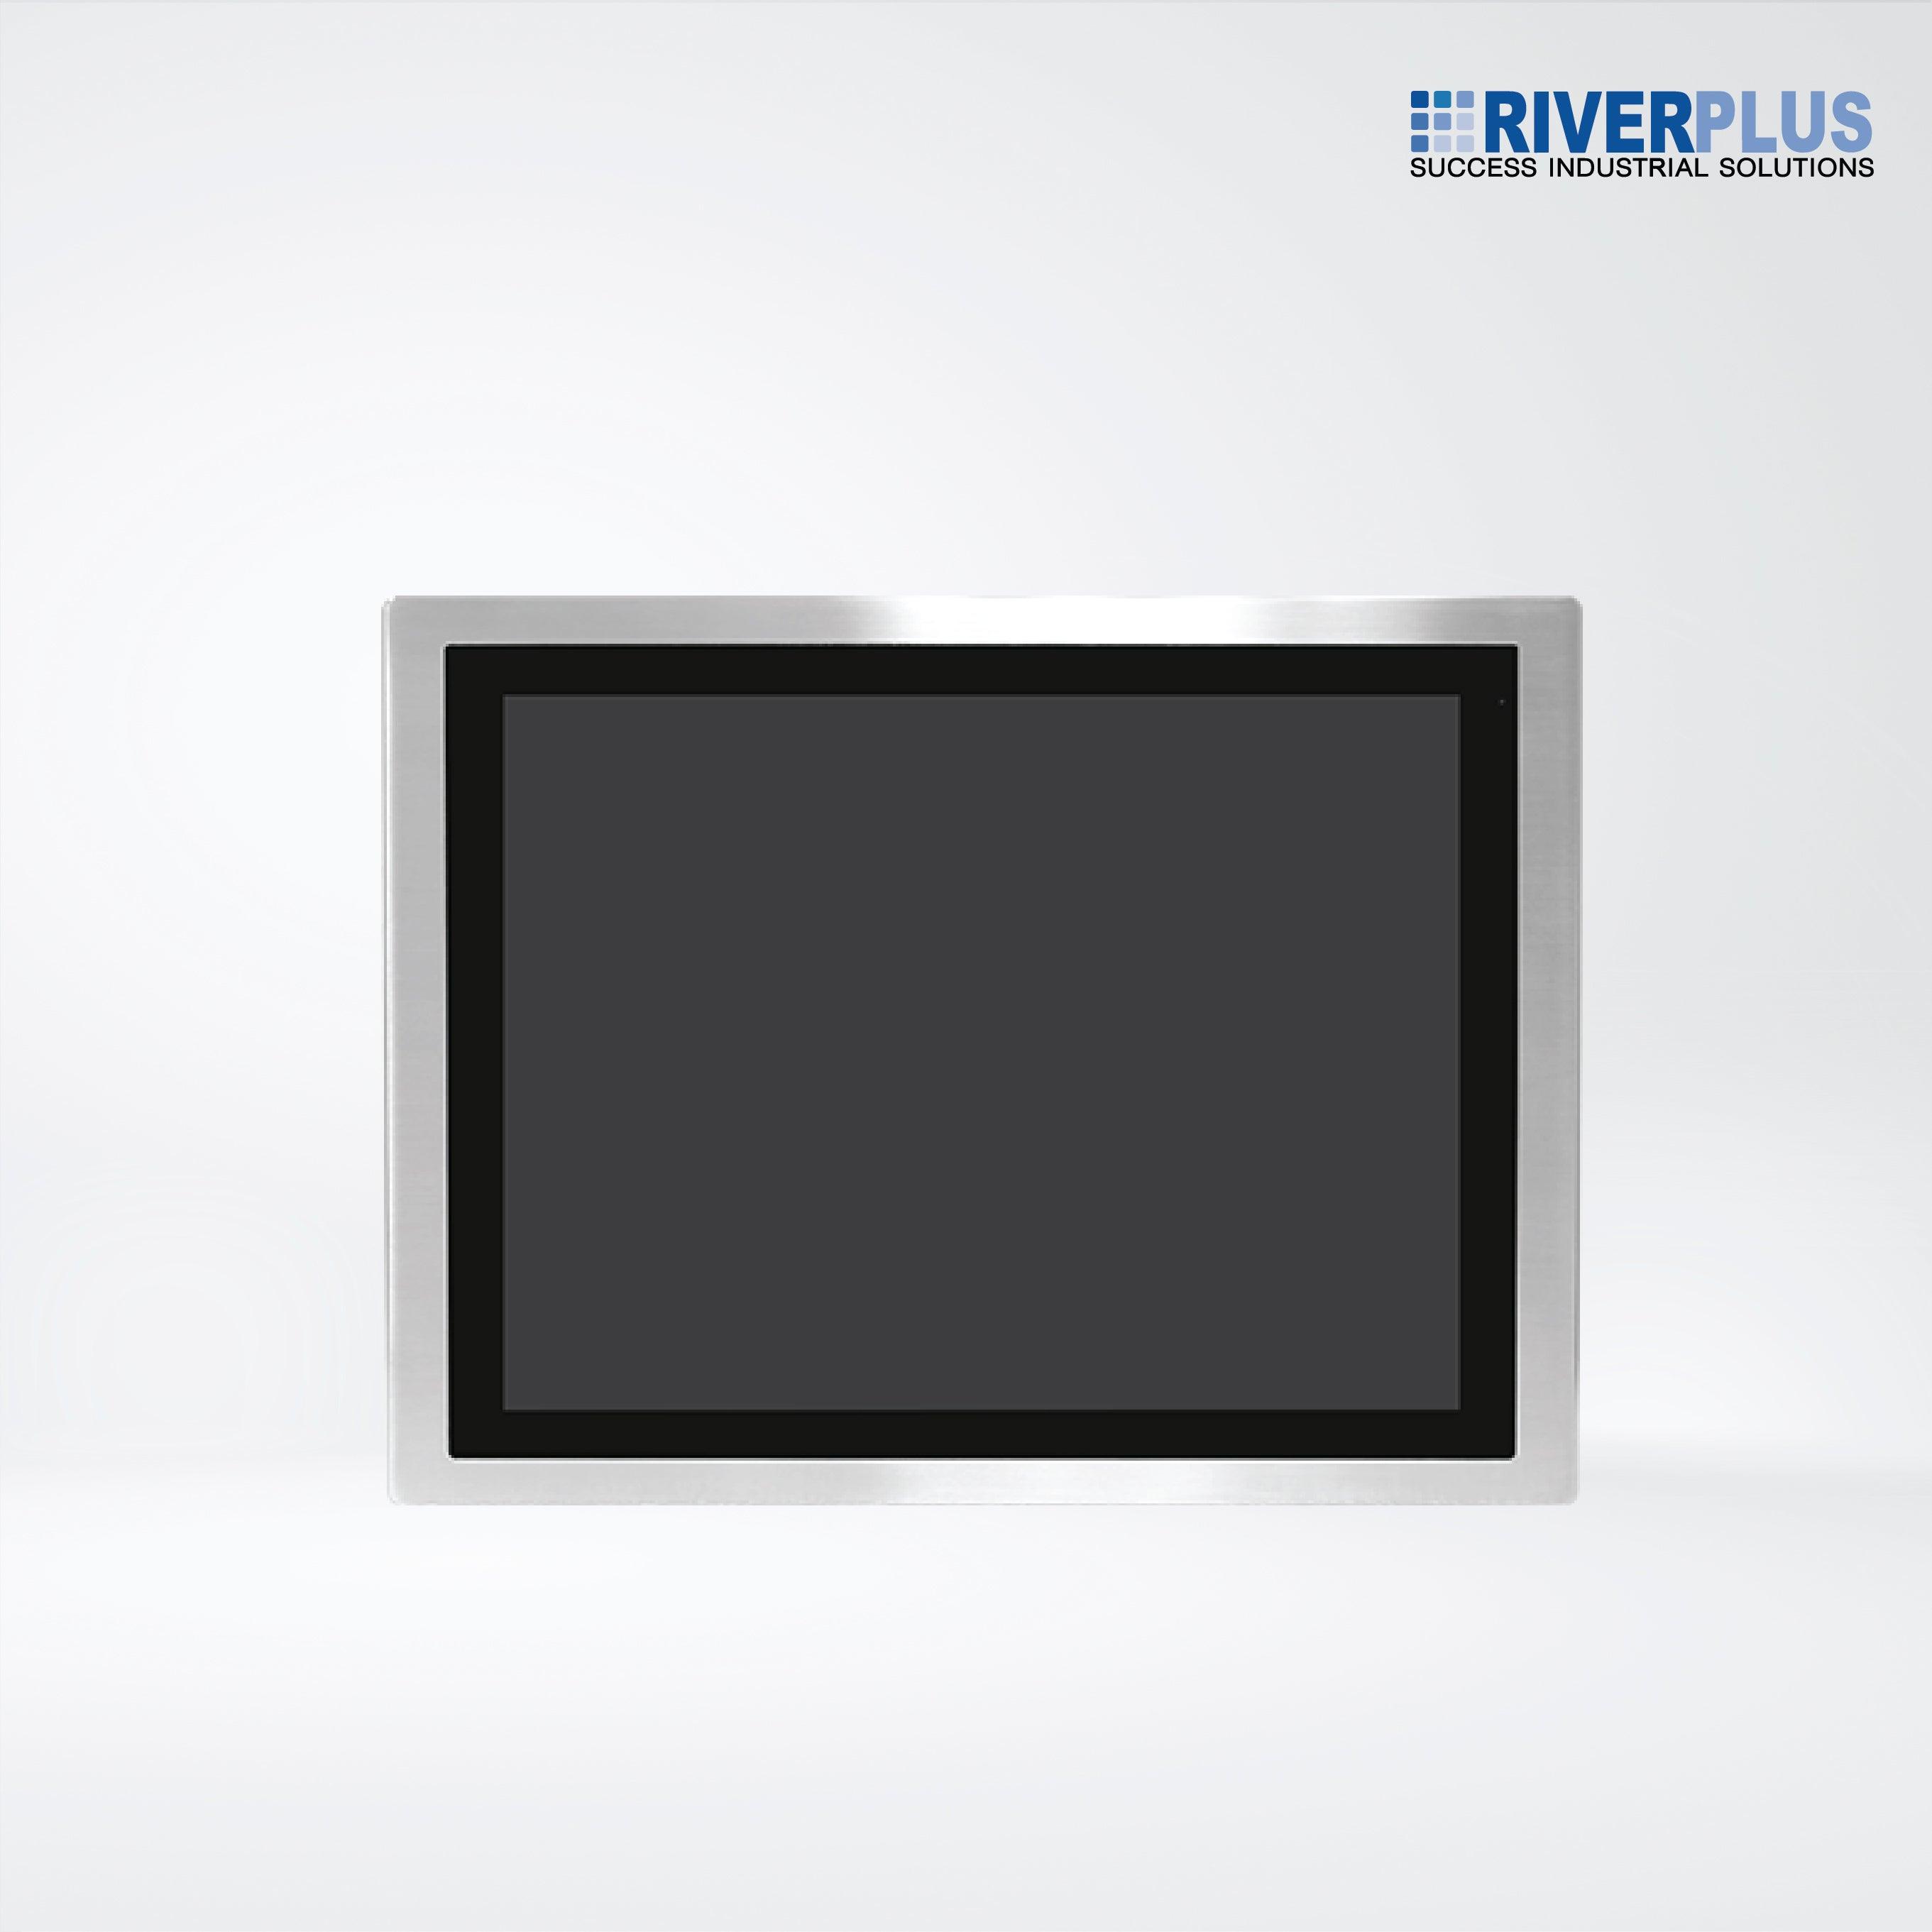 FABS-119PH 19” Flat Front Panel IP66 Stainless Chassis Display - Riverplus